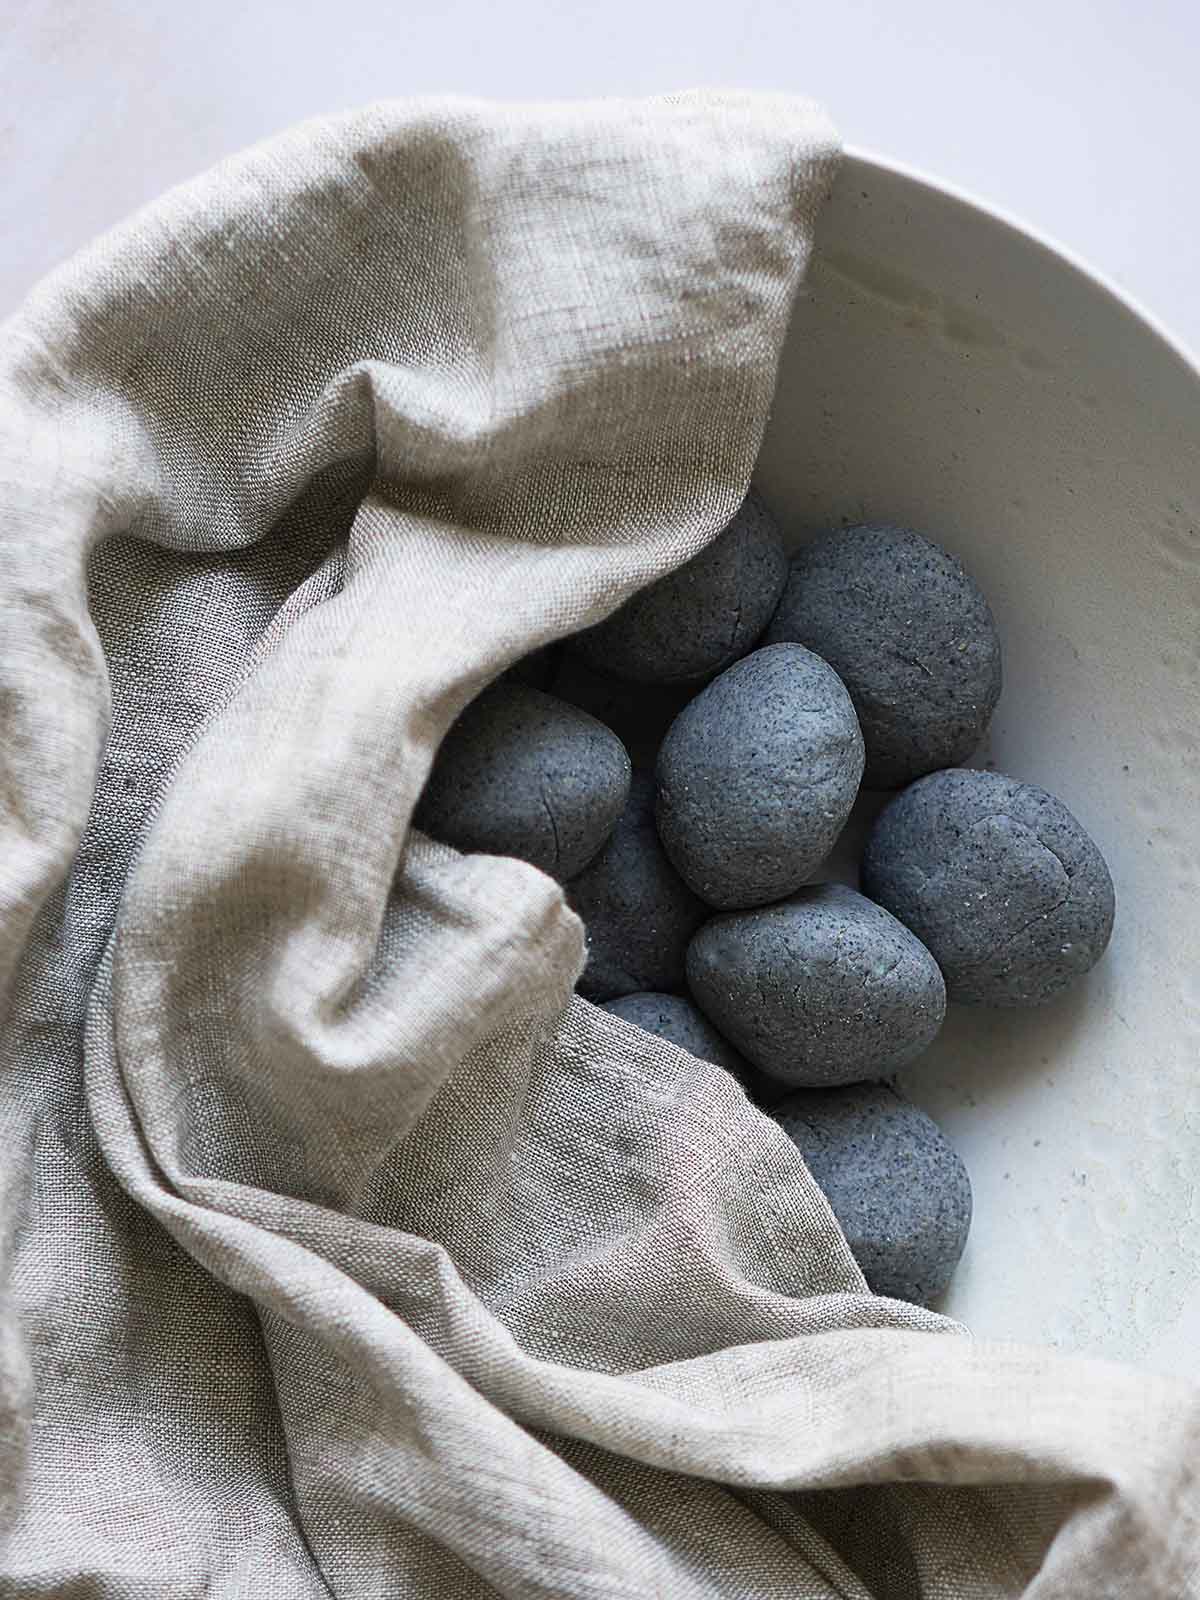 Masa balls covered by a linen kitchen towel.